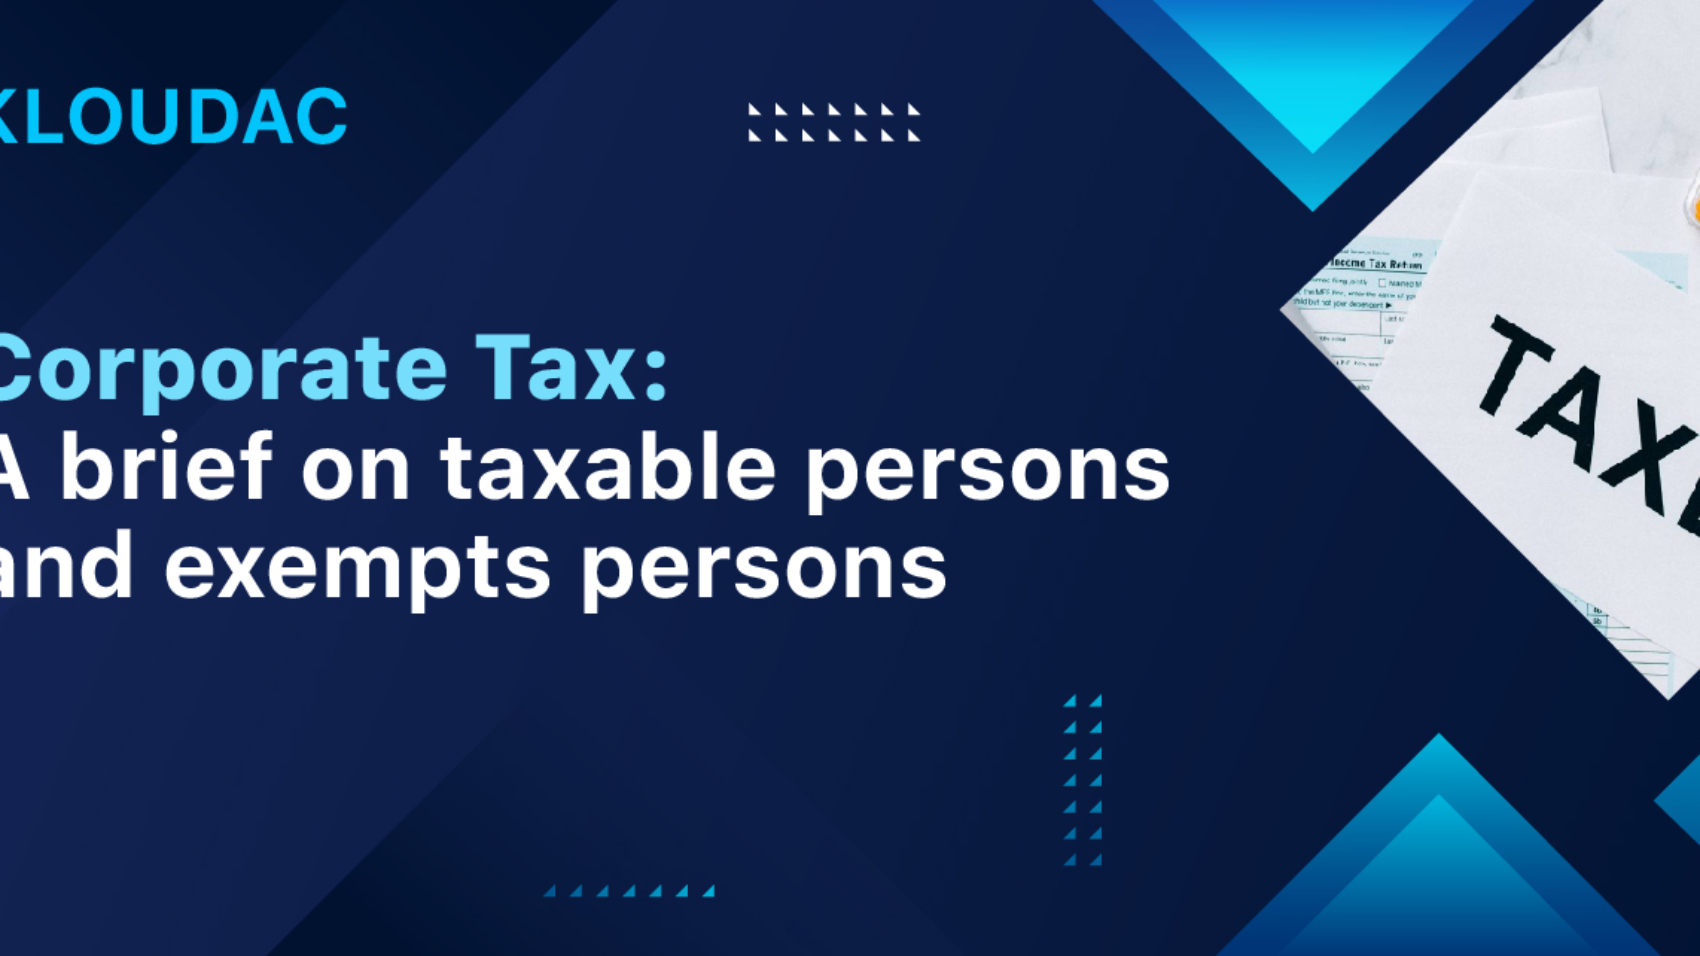 Corporate Tax: A brief on taxable persons and exempts persons